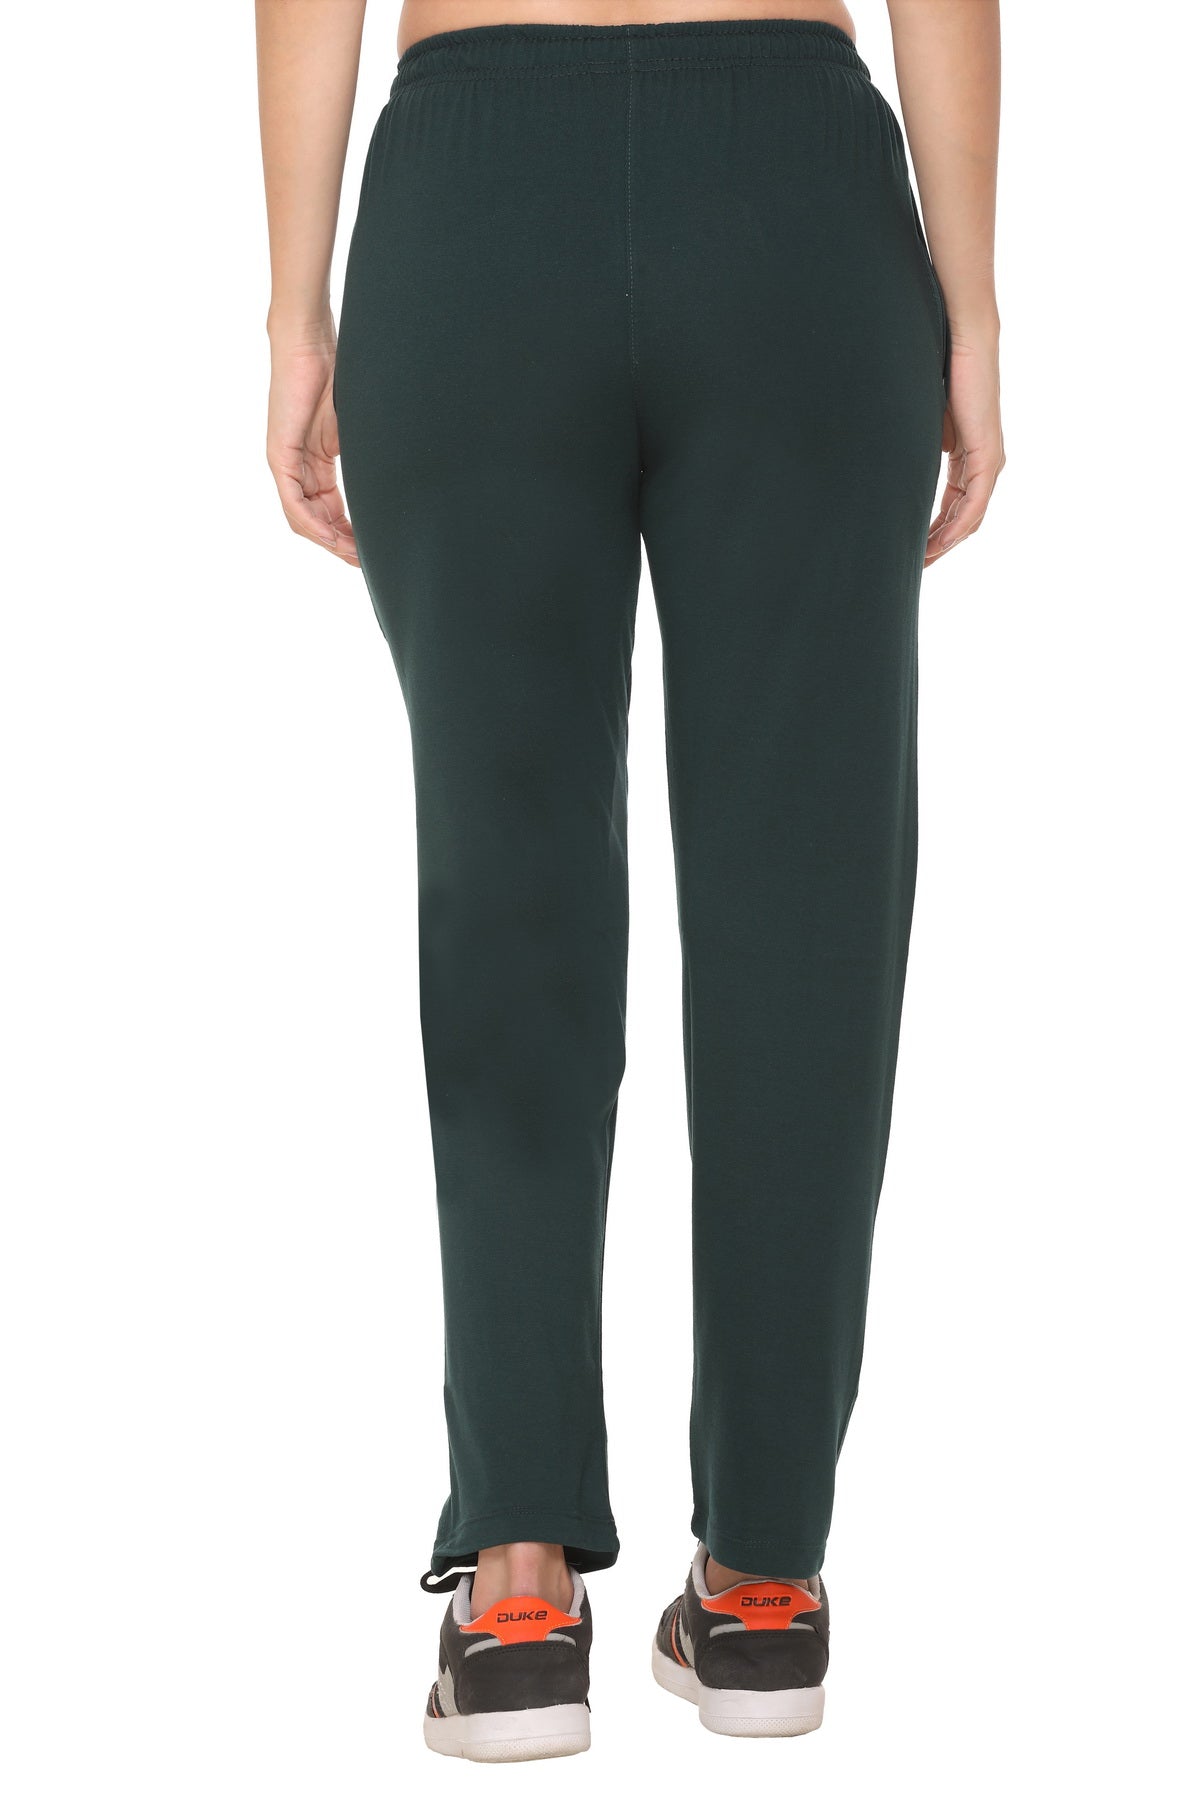 Buy Stylish Track pants for Women (Pack Of 3) online in India